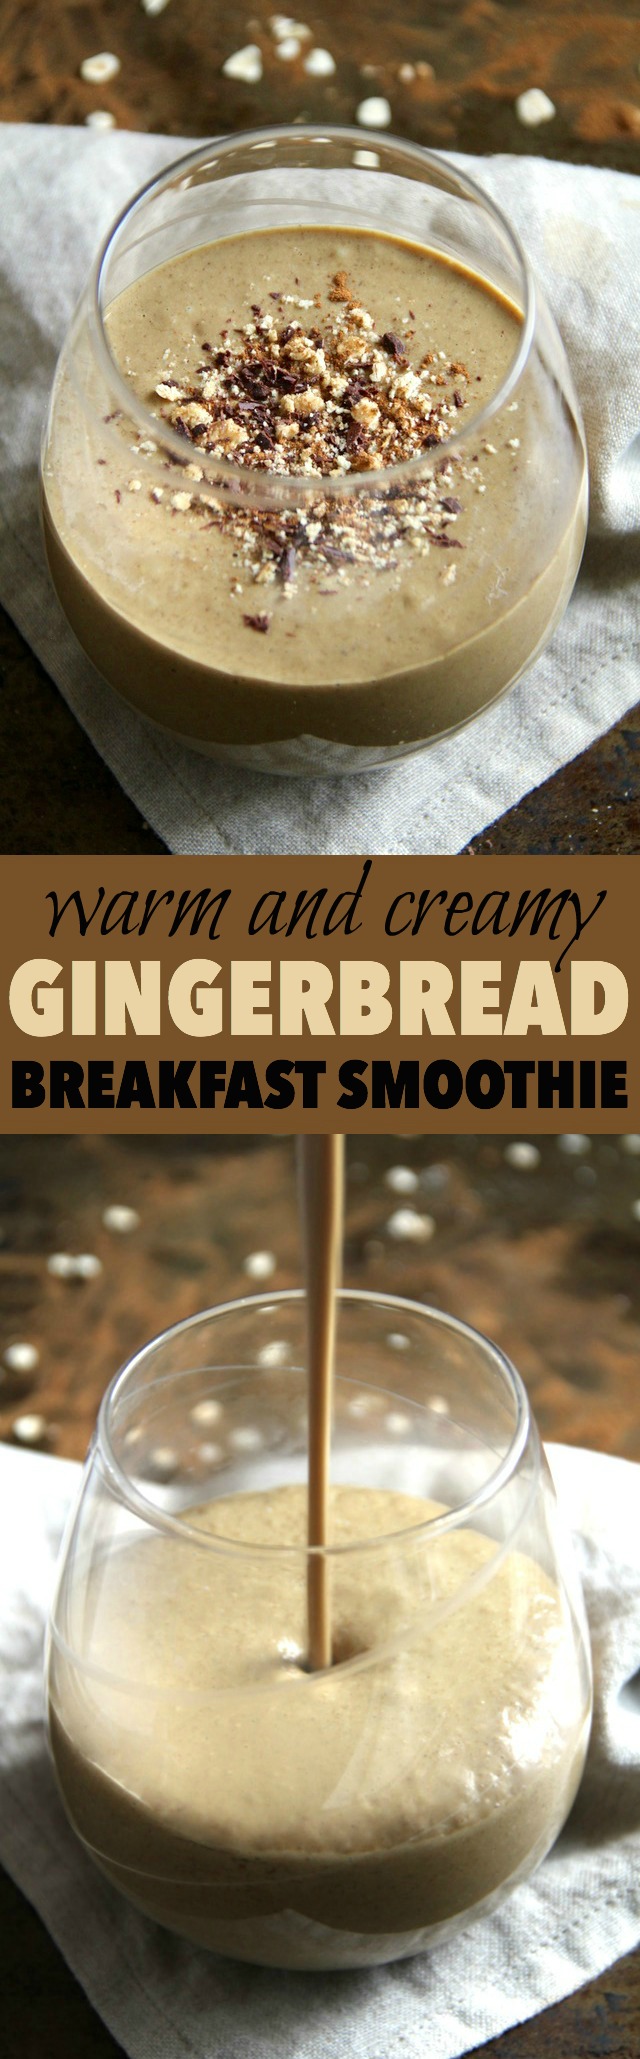 This Warm Gingerbread Breakfast Smoothie is heated on the stovetop post-blending to create a creamy and comforting drink that's packed with fibre, minerals, and plant based protein -- the perfect healthy and delicious breakfast or snack! || runningwithspoons.com #breakfast #smoothie #gingerbread #vegan